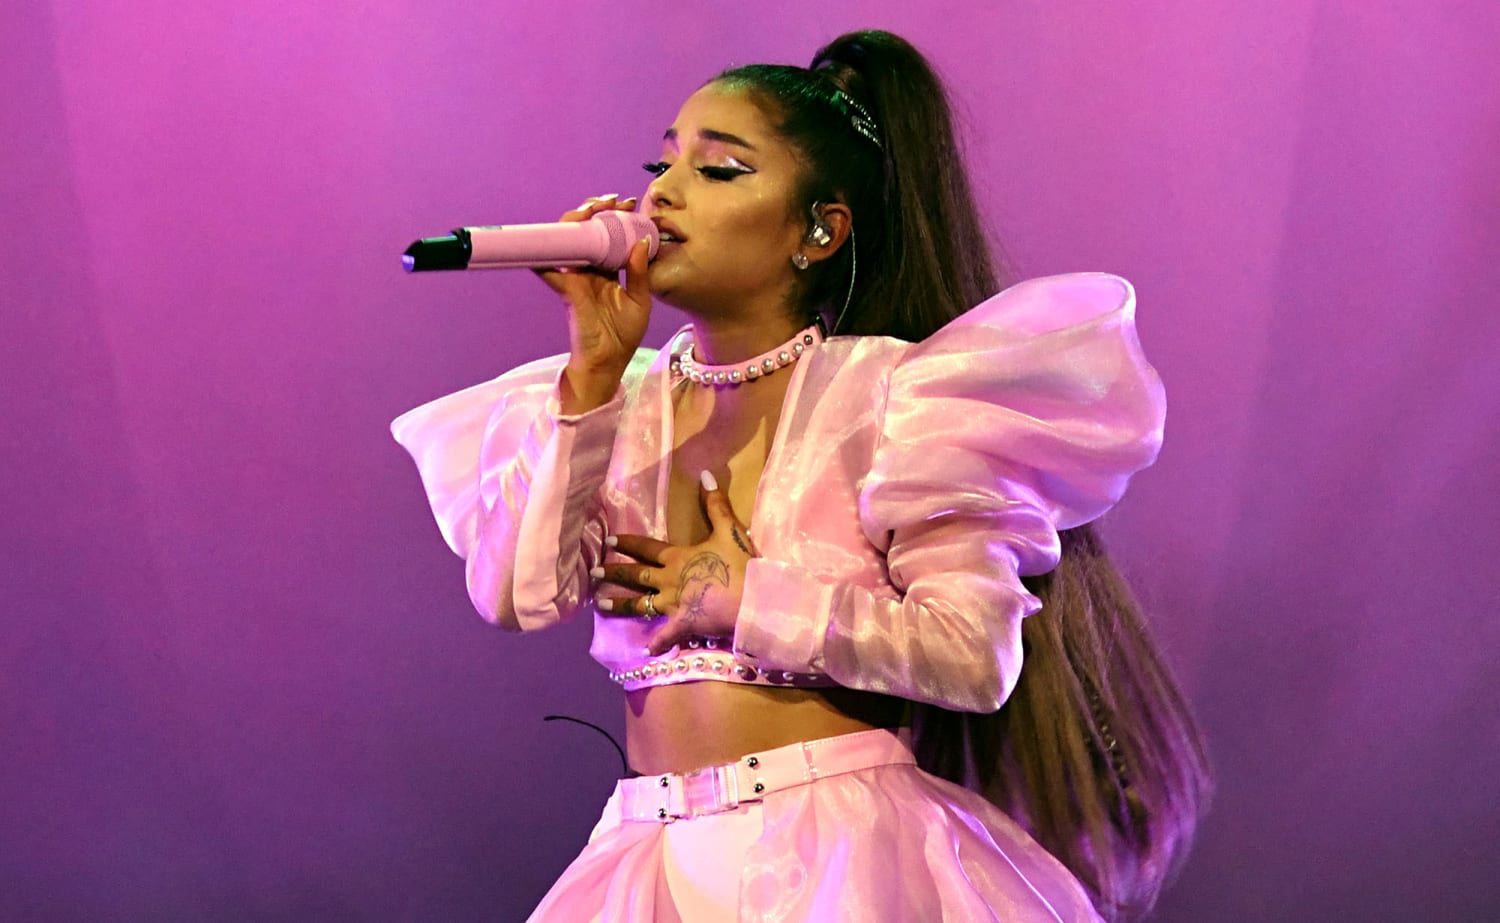 Ariana Grande to perform at 2020 Grammy Awards after backing out of last year's show